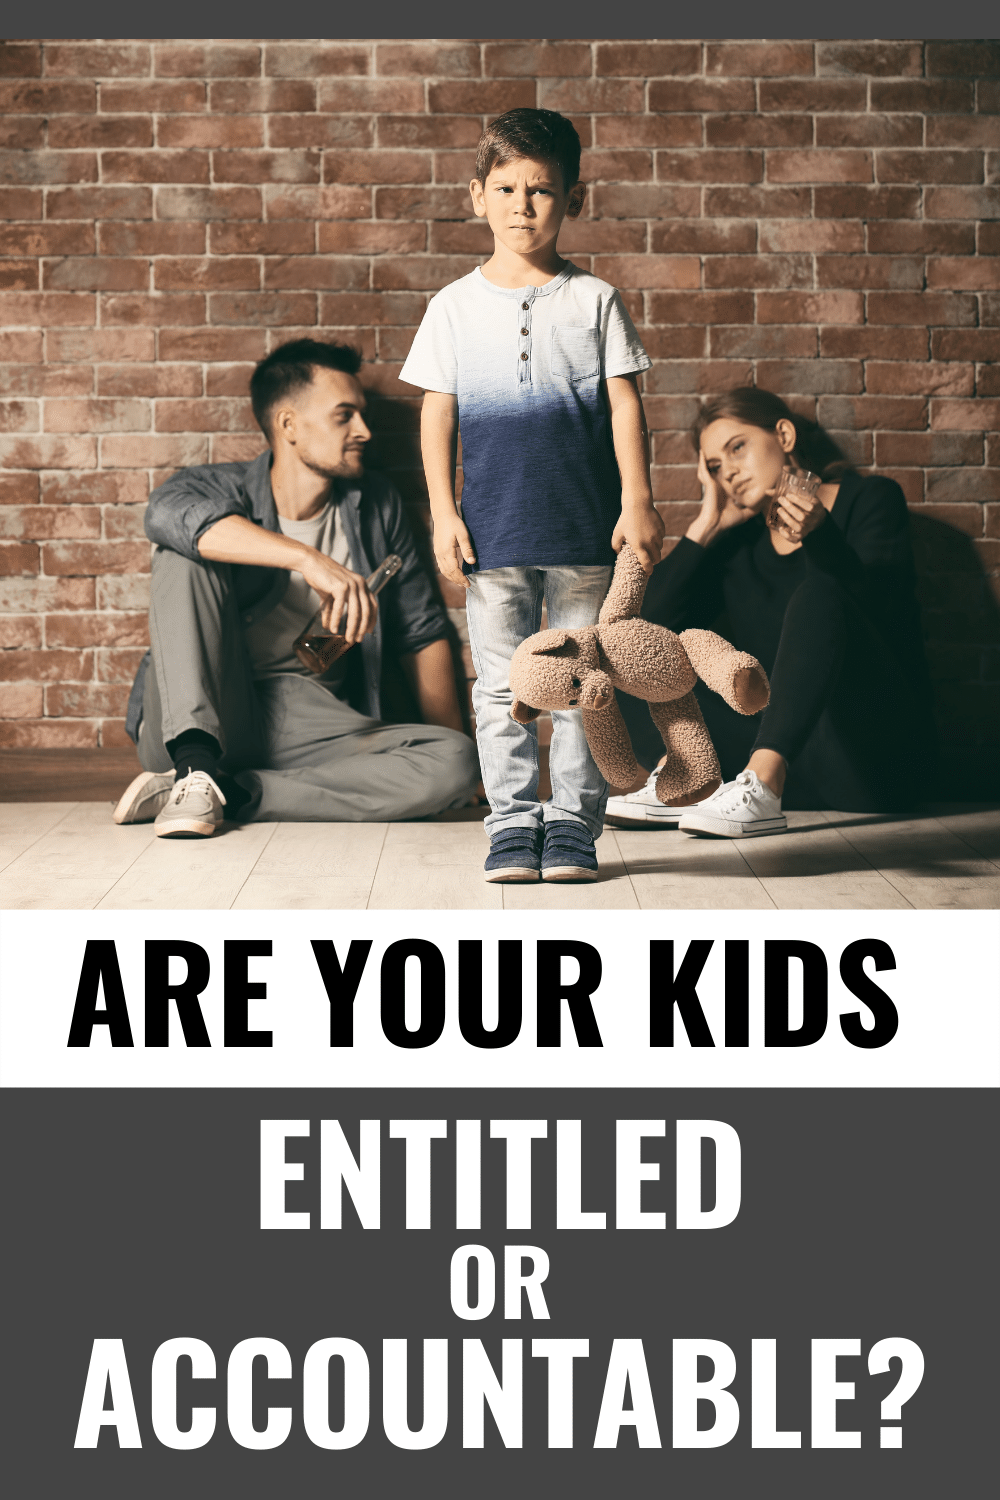 Are your kids entitled or are you holding your kids accountable? Learn to take the steps to ensure you enrich your kids' lives and those around them. #parentingtips #entitledkids #accountable via @wondermomwannab